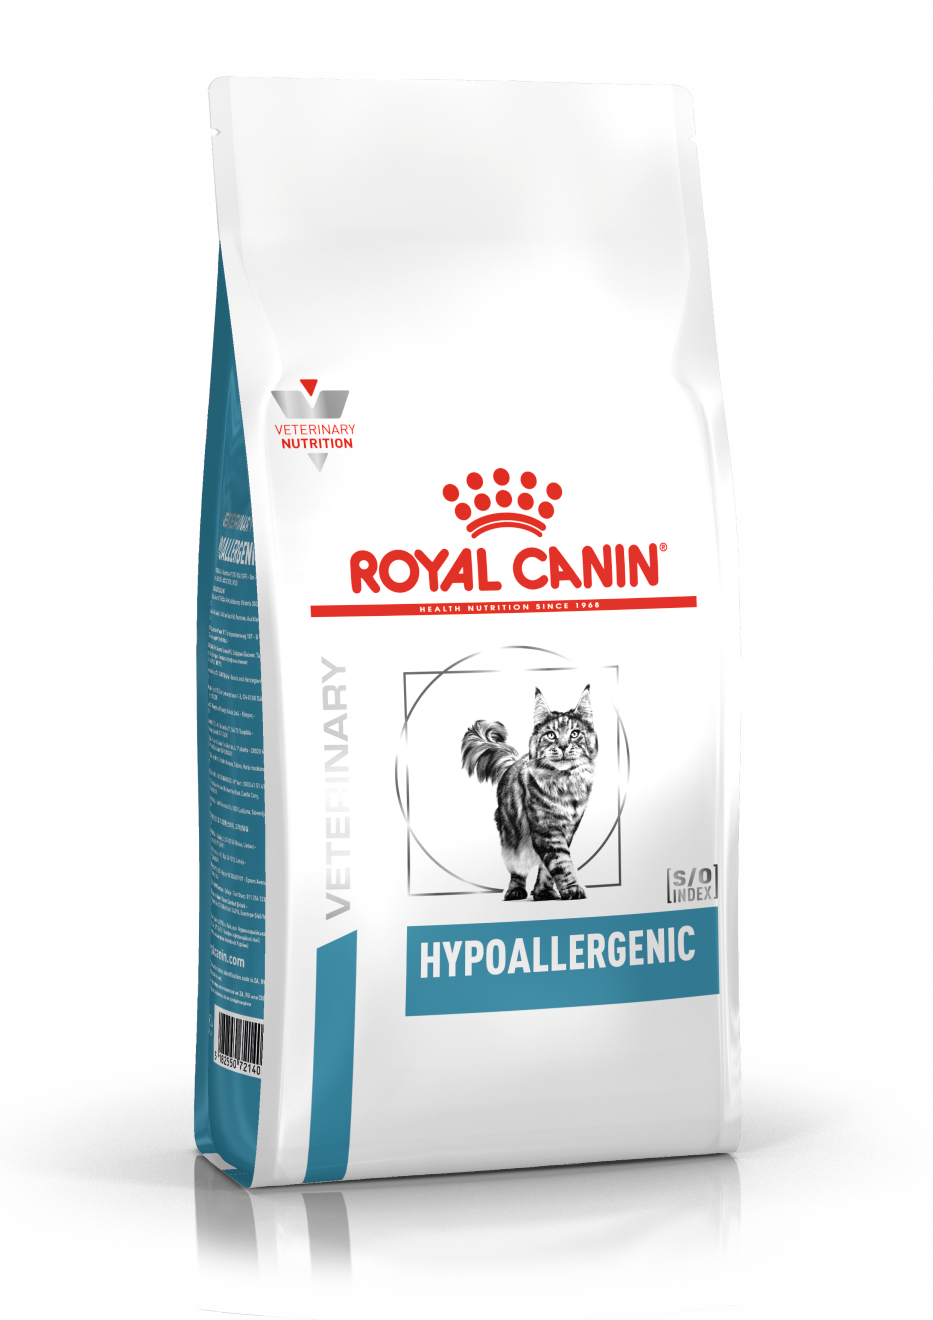 Royal Canin - Hypoallergenic Cat